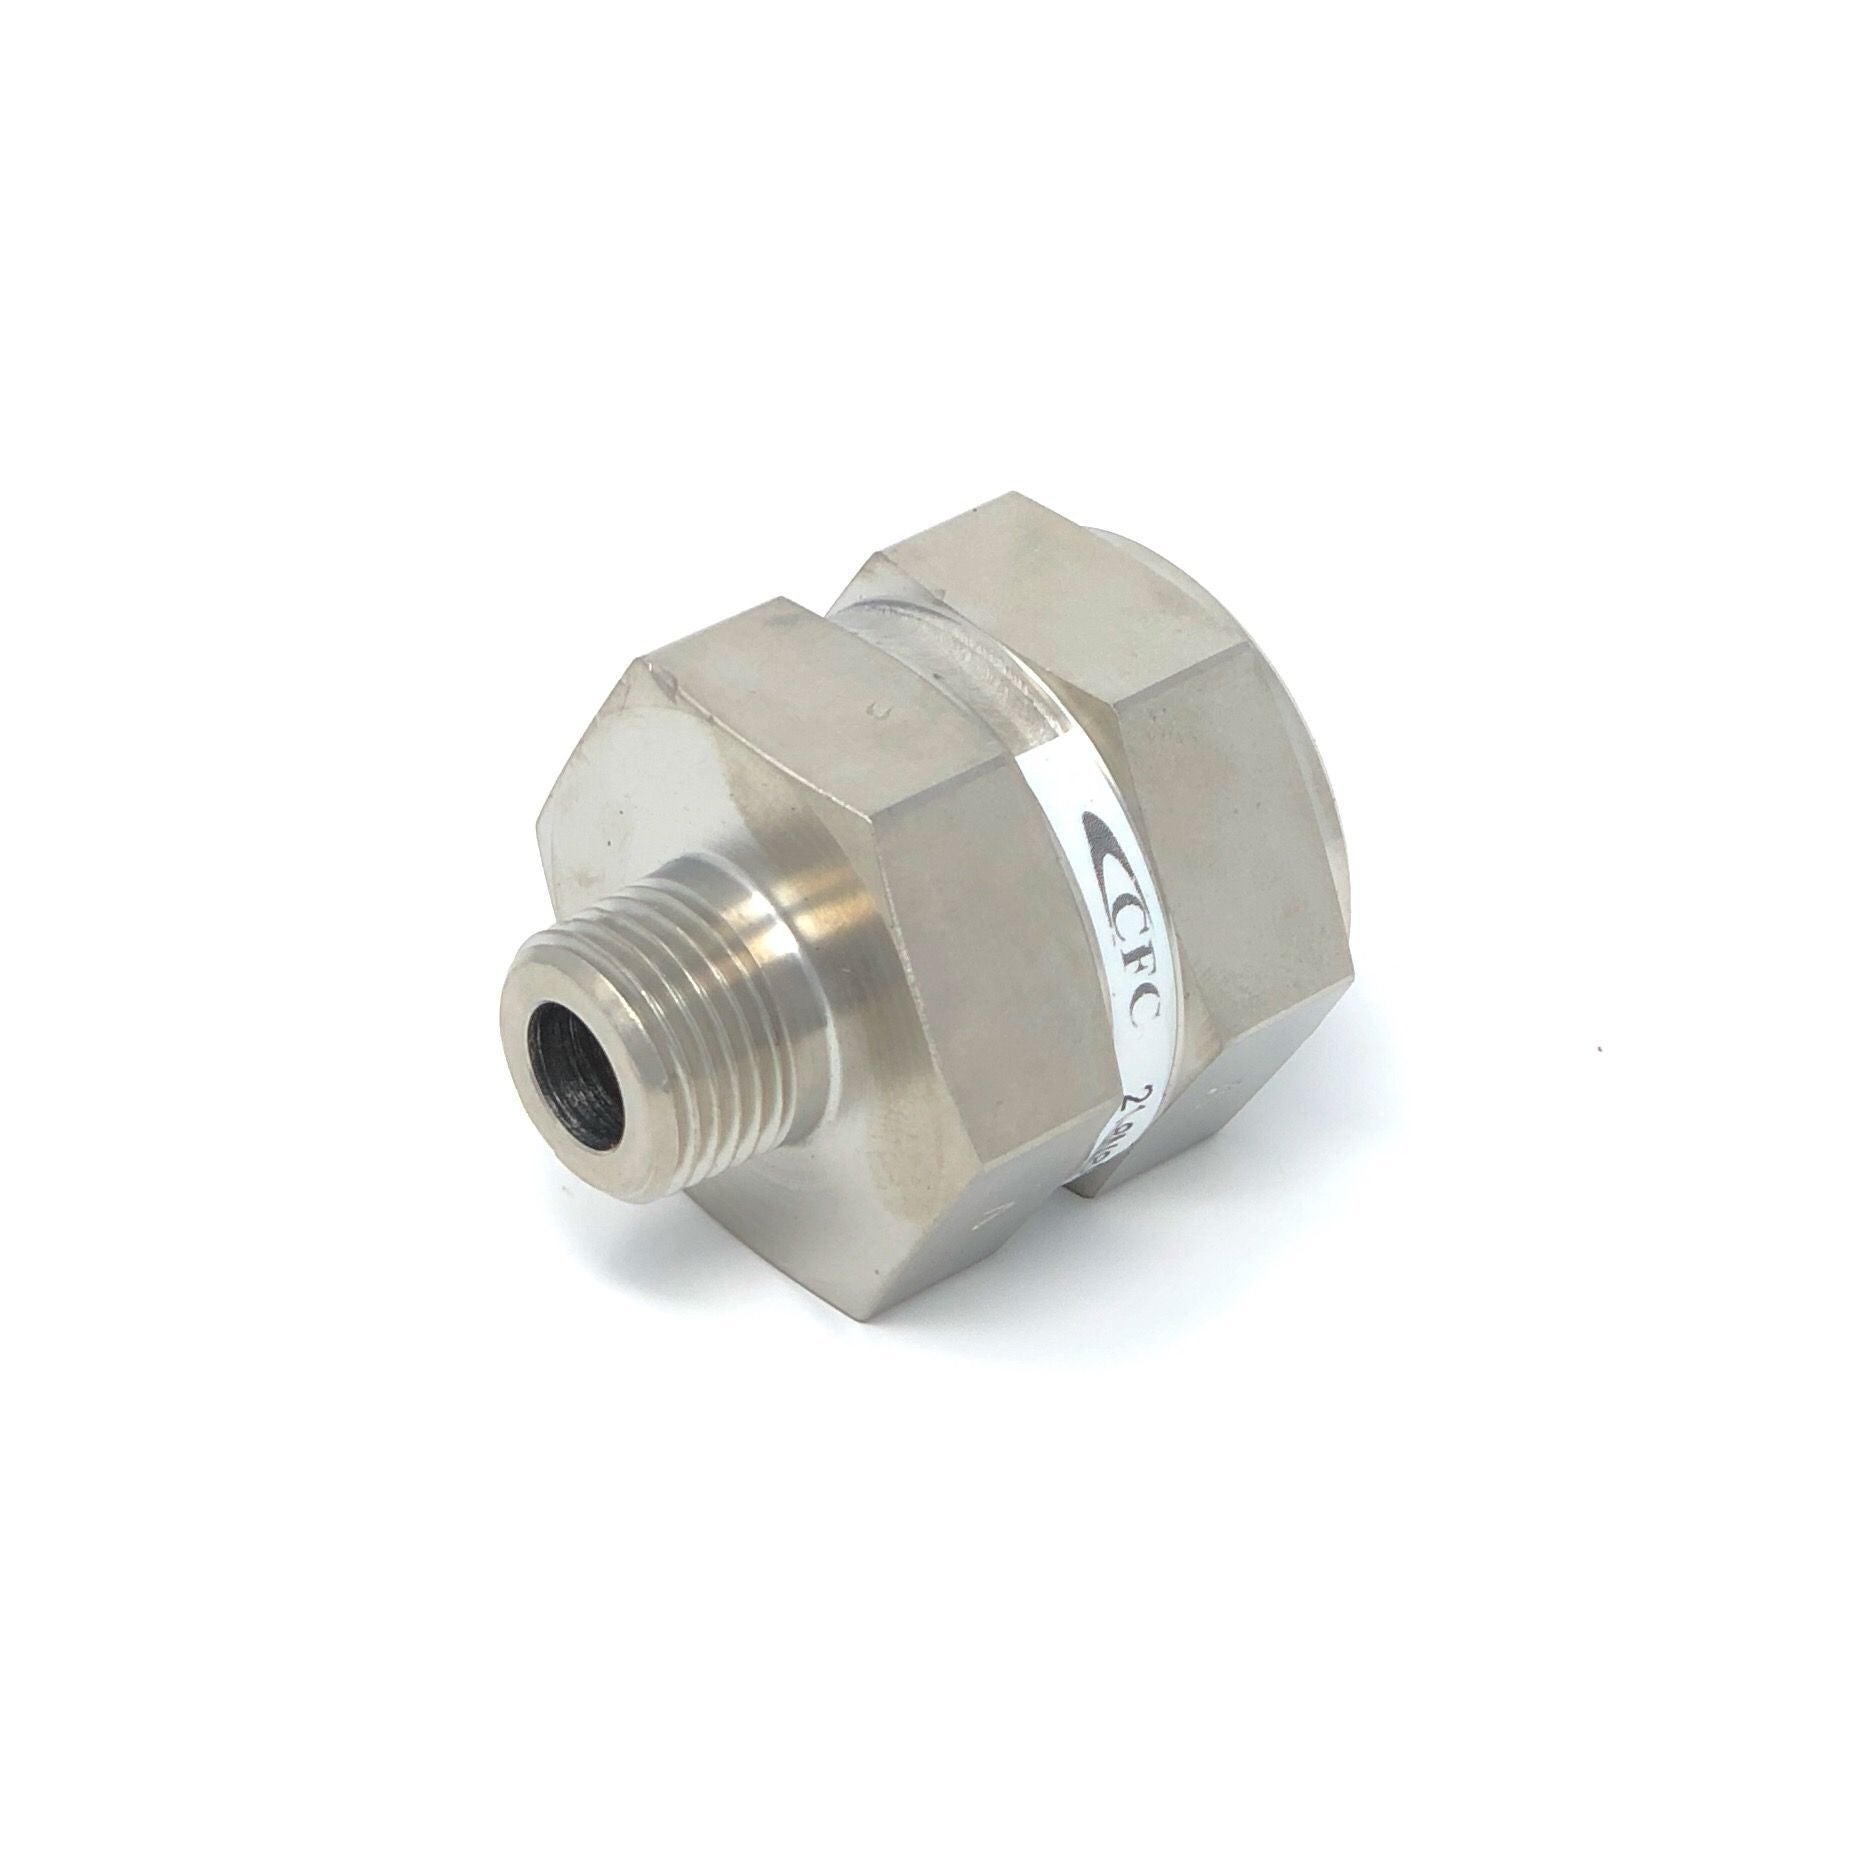 21-6T6T-10S : Chase High Pressure Inline Filter, 6000psi, 3/8" 37 Degree Flare , 10 Micron, No Visual Indicator, No Bypass